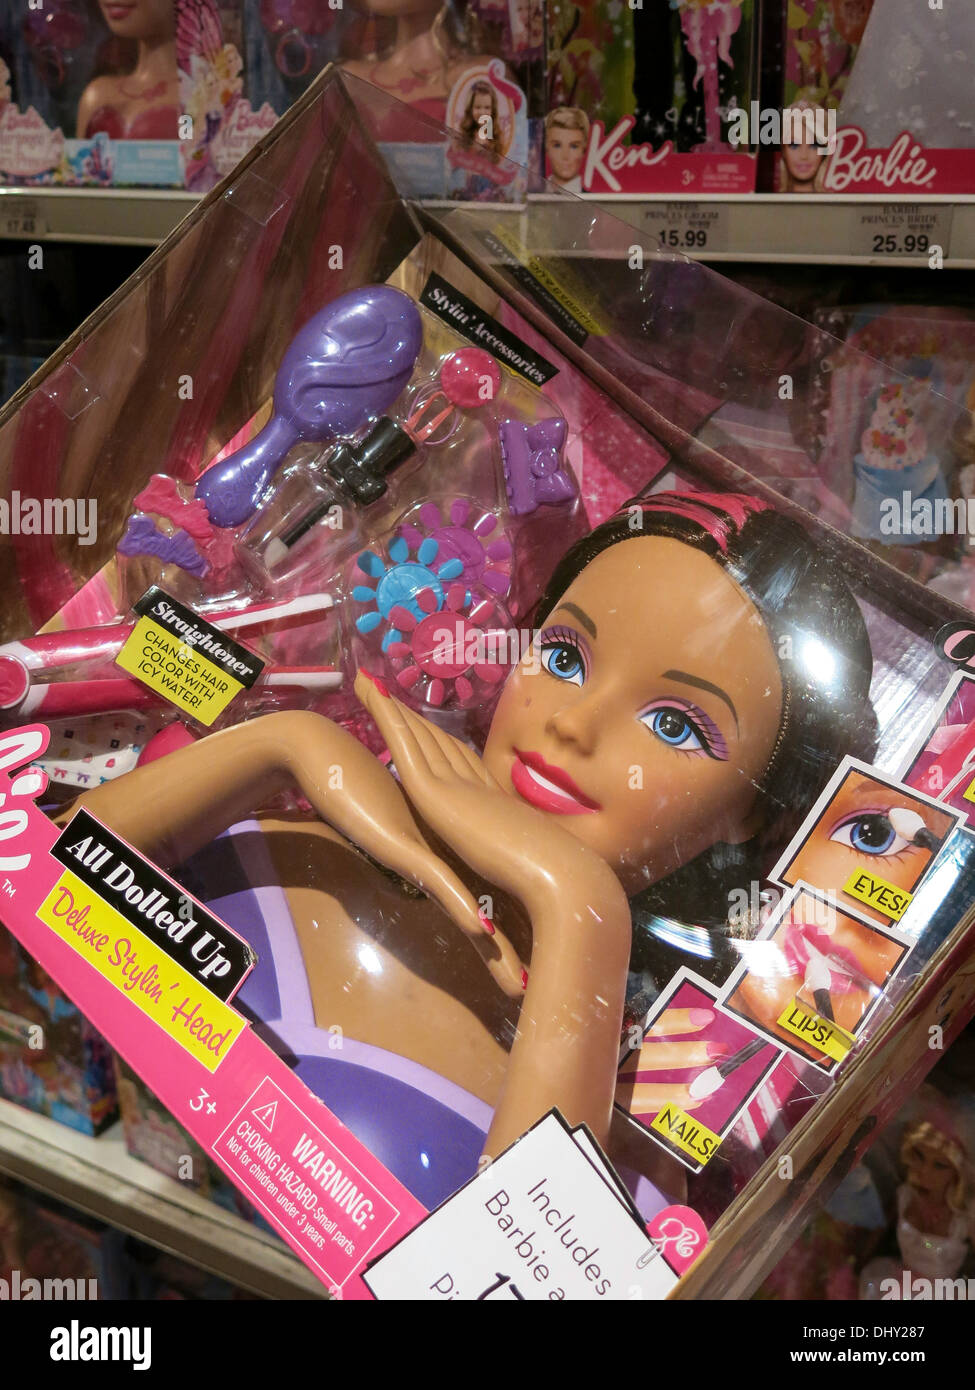 Barbie Doll Deluxe Stylin' Head, Barbie's Dream House display, interno del Toys R Us Store, Times Square, NYC 2013 Foto Stock